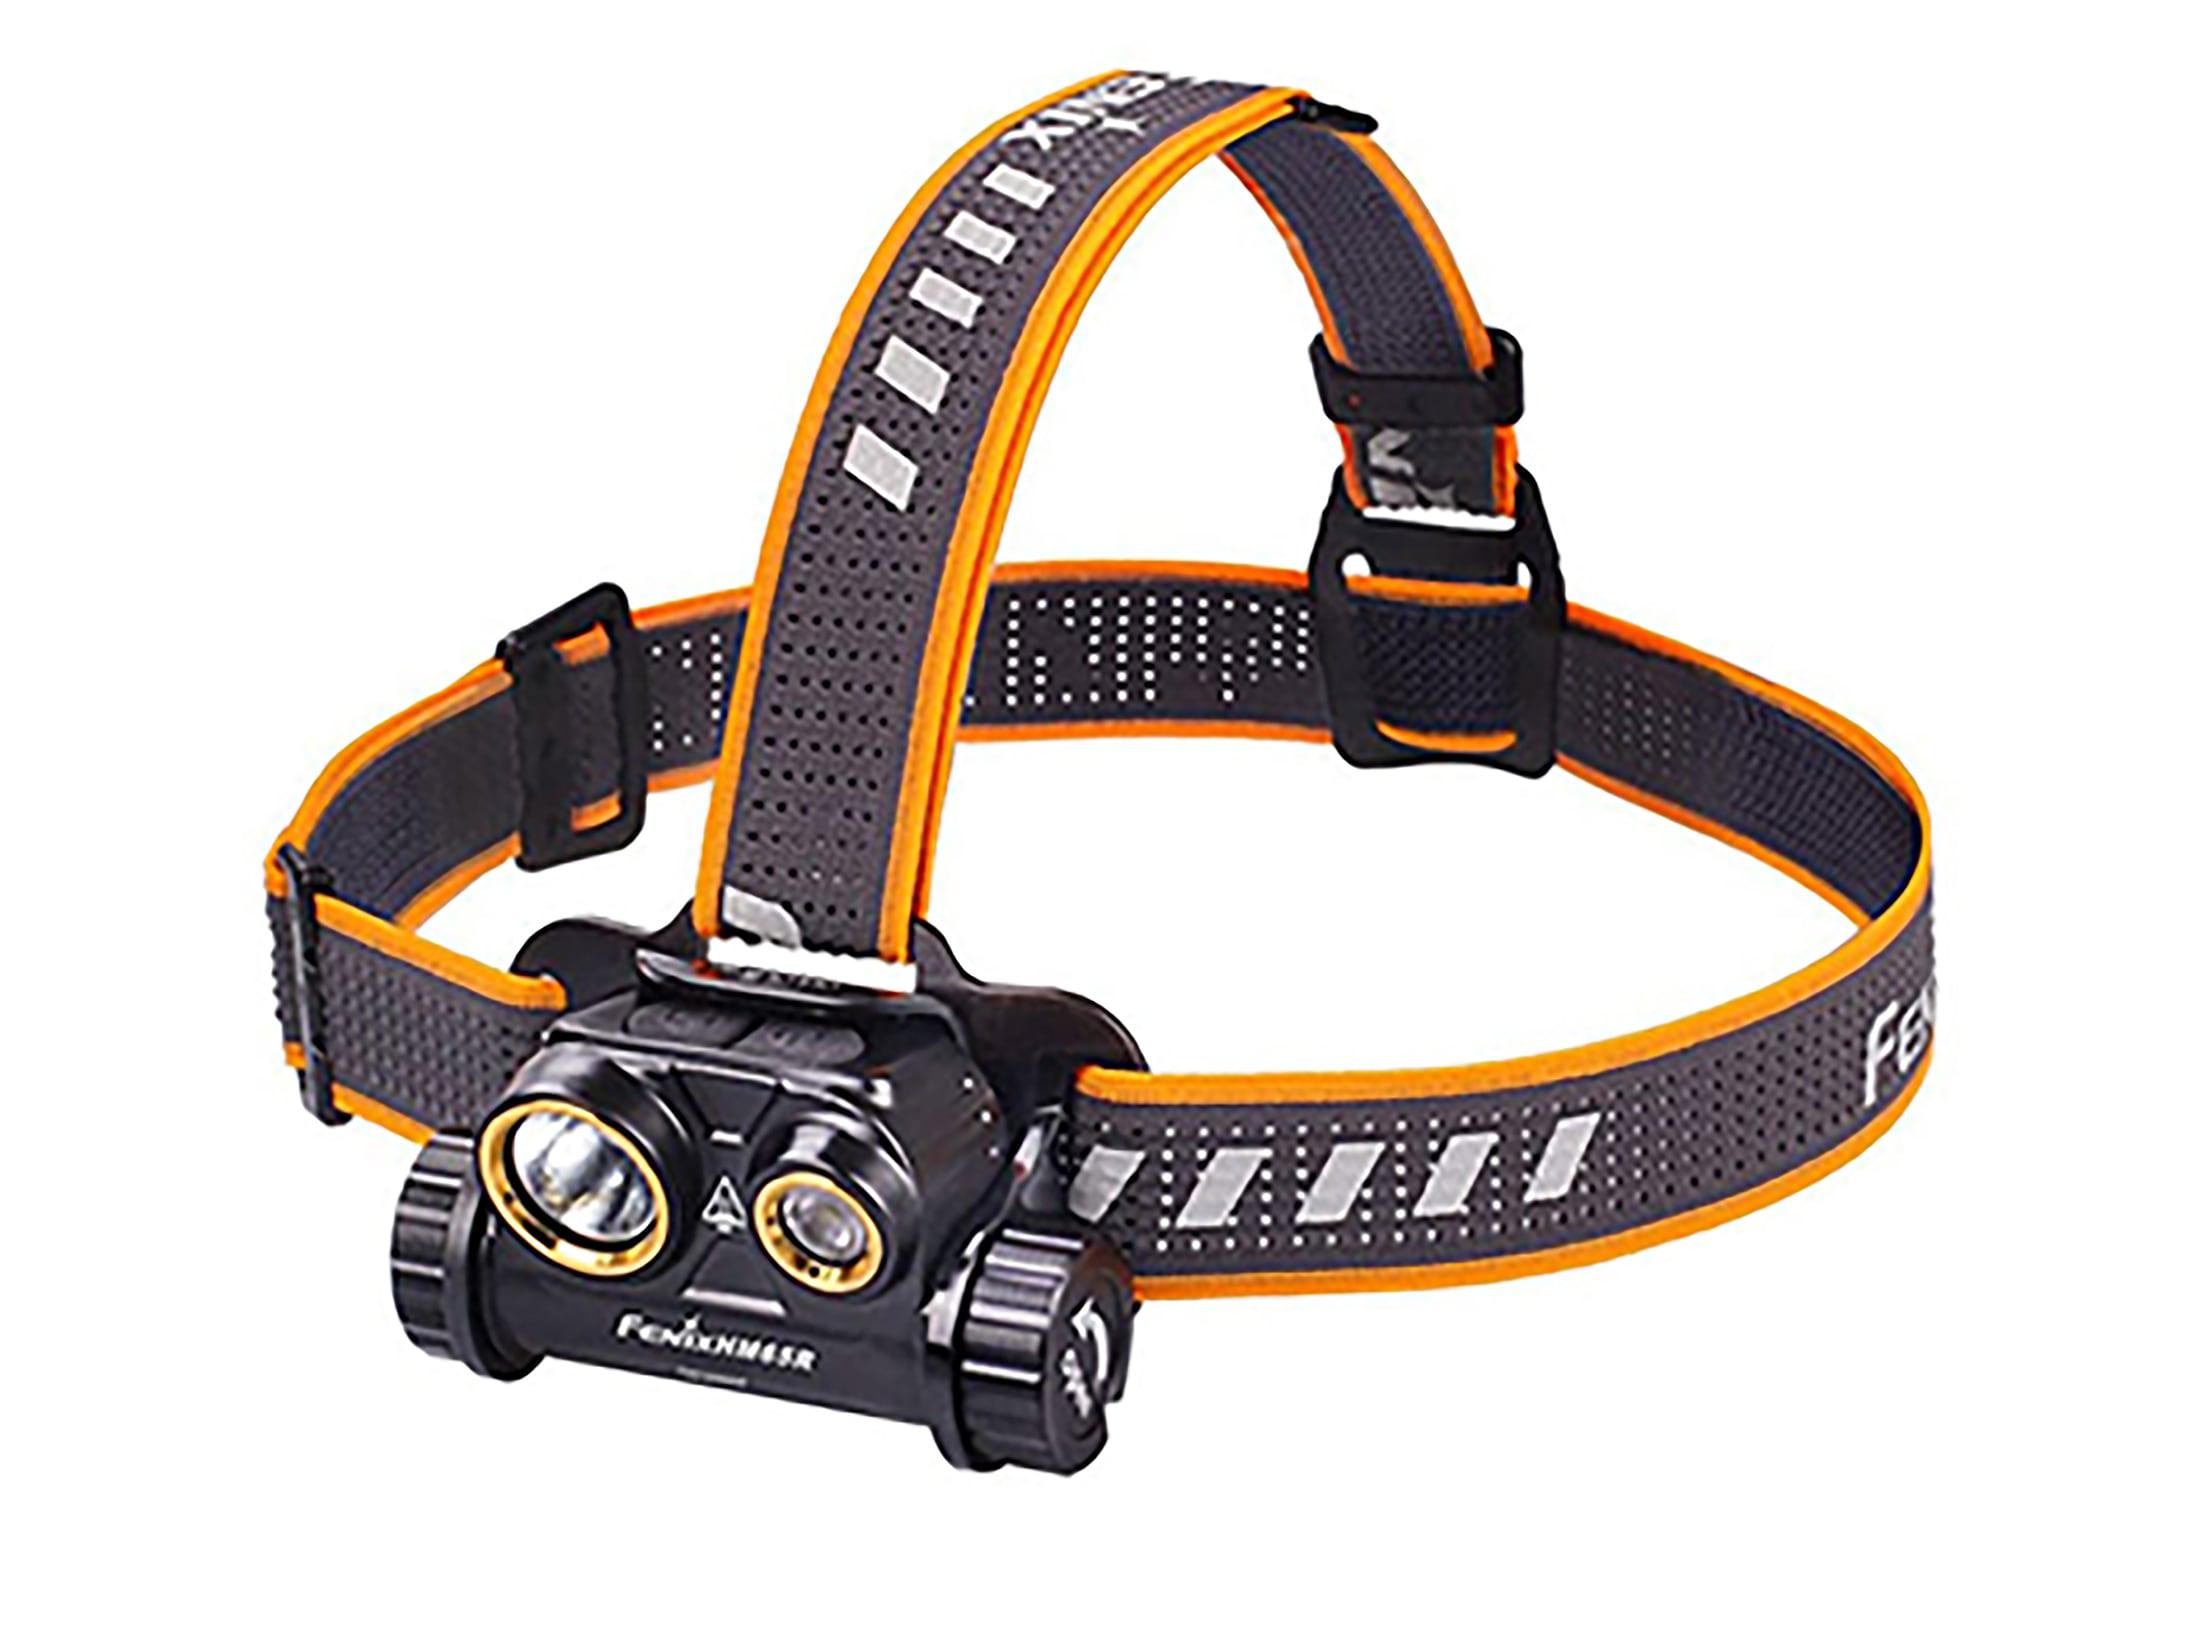 Image for Fenix HM65R Headlamp LED Rechargeable Lithium Battery Magnesium Alloy